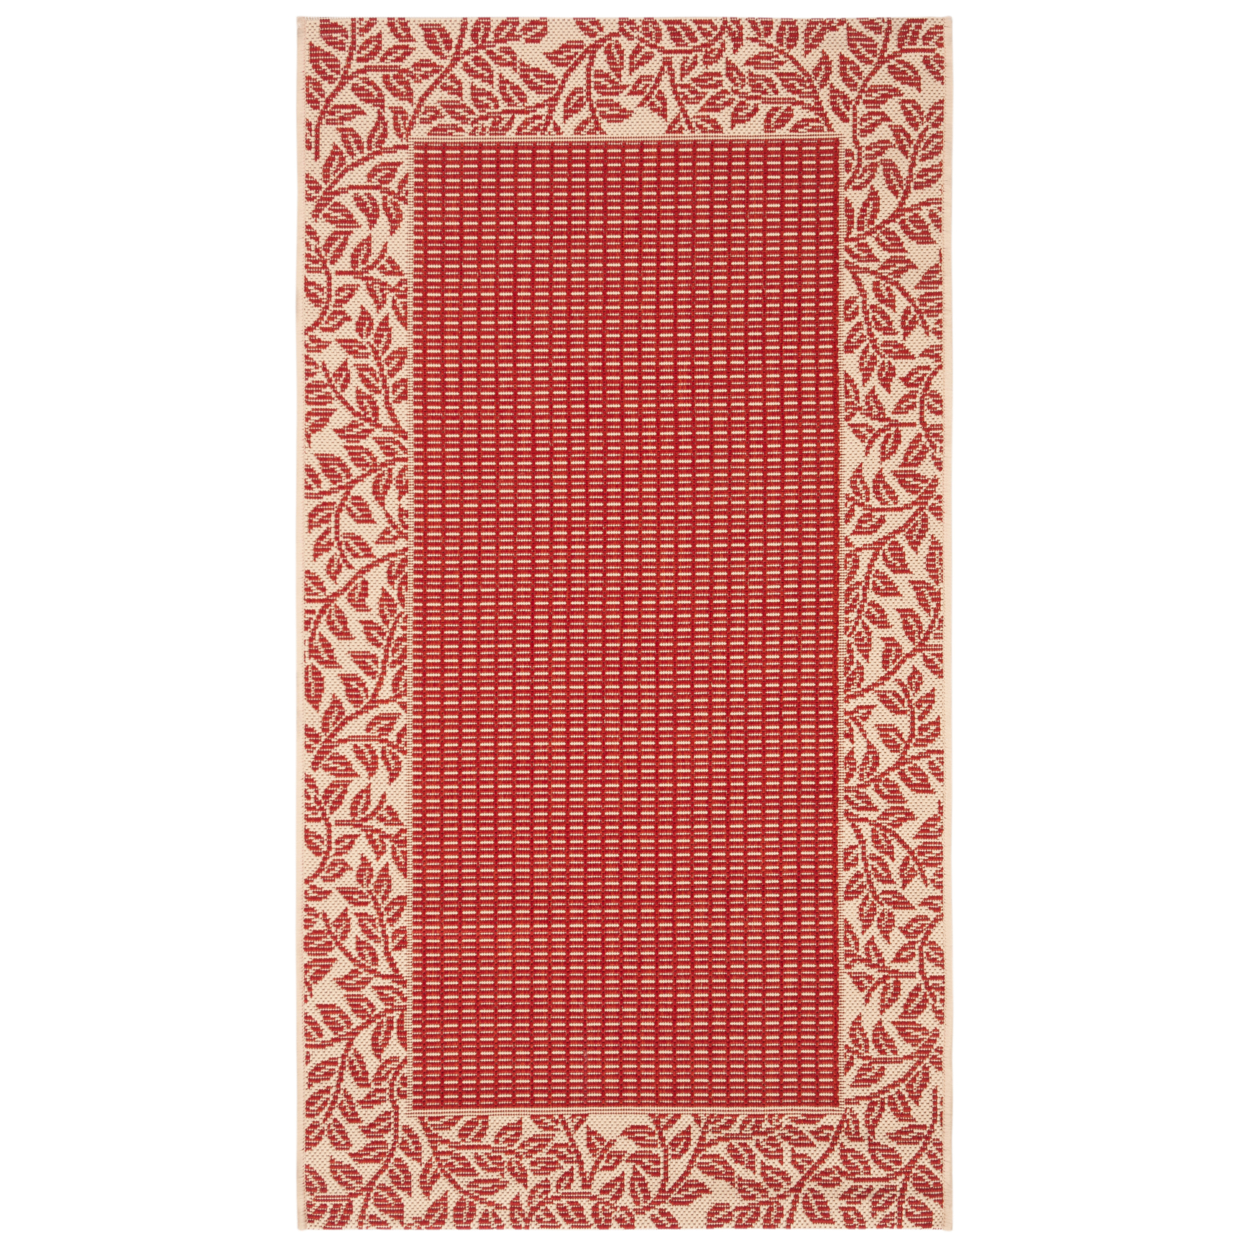 SAFAVIEH Courtyard CY0727-3707 Red / Natural Rug - 4' X 5' 7